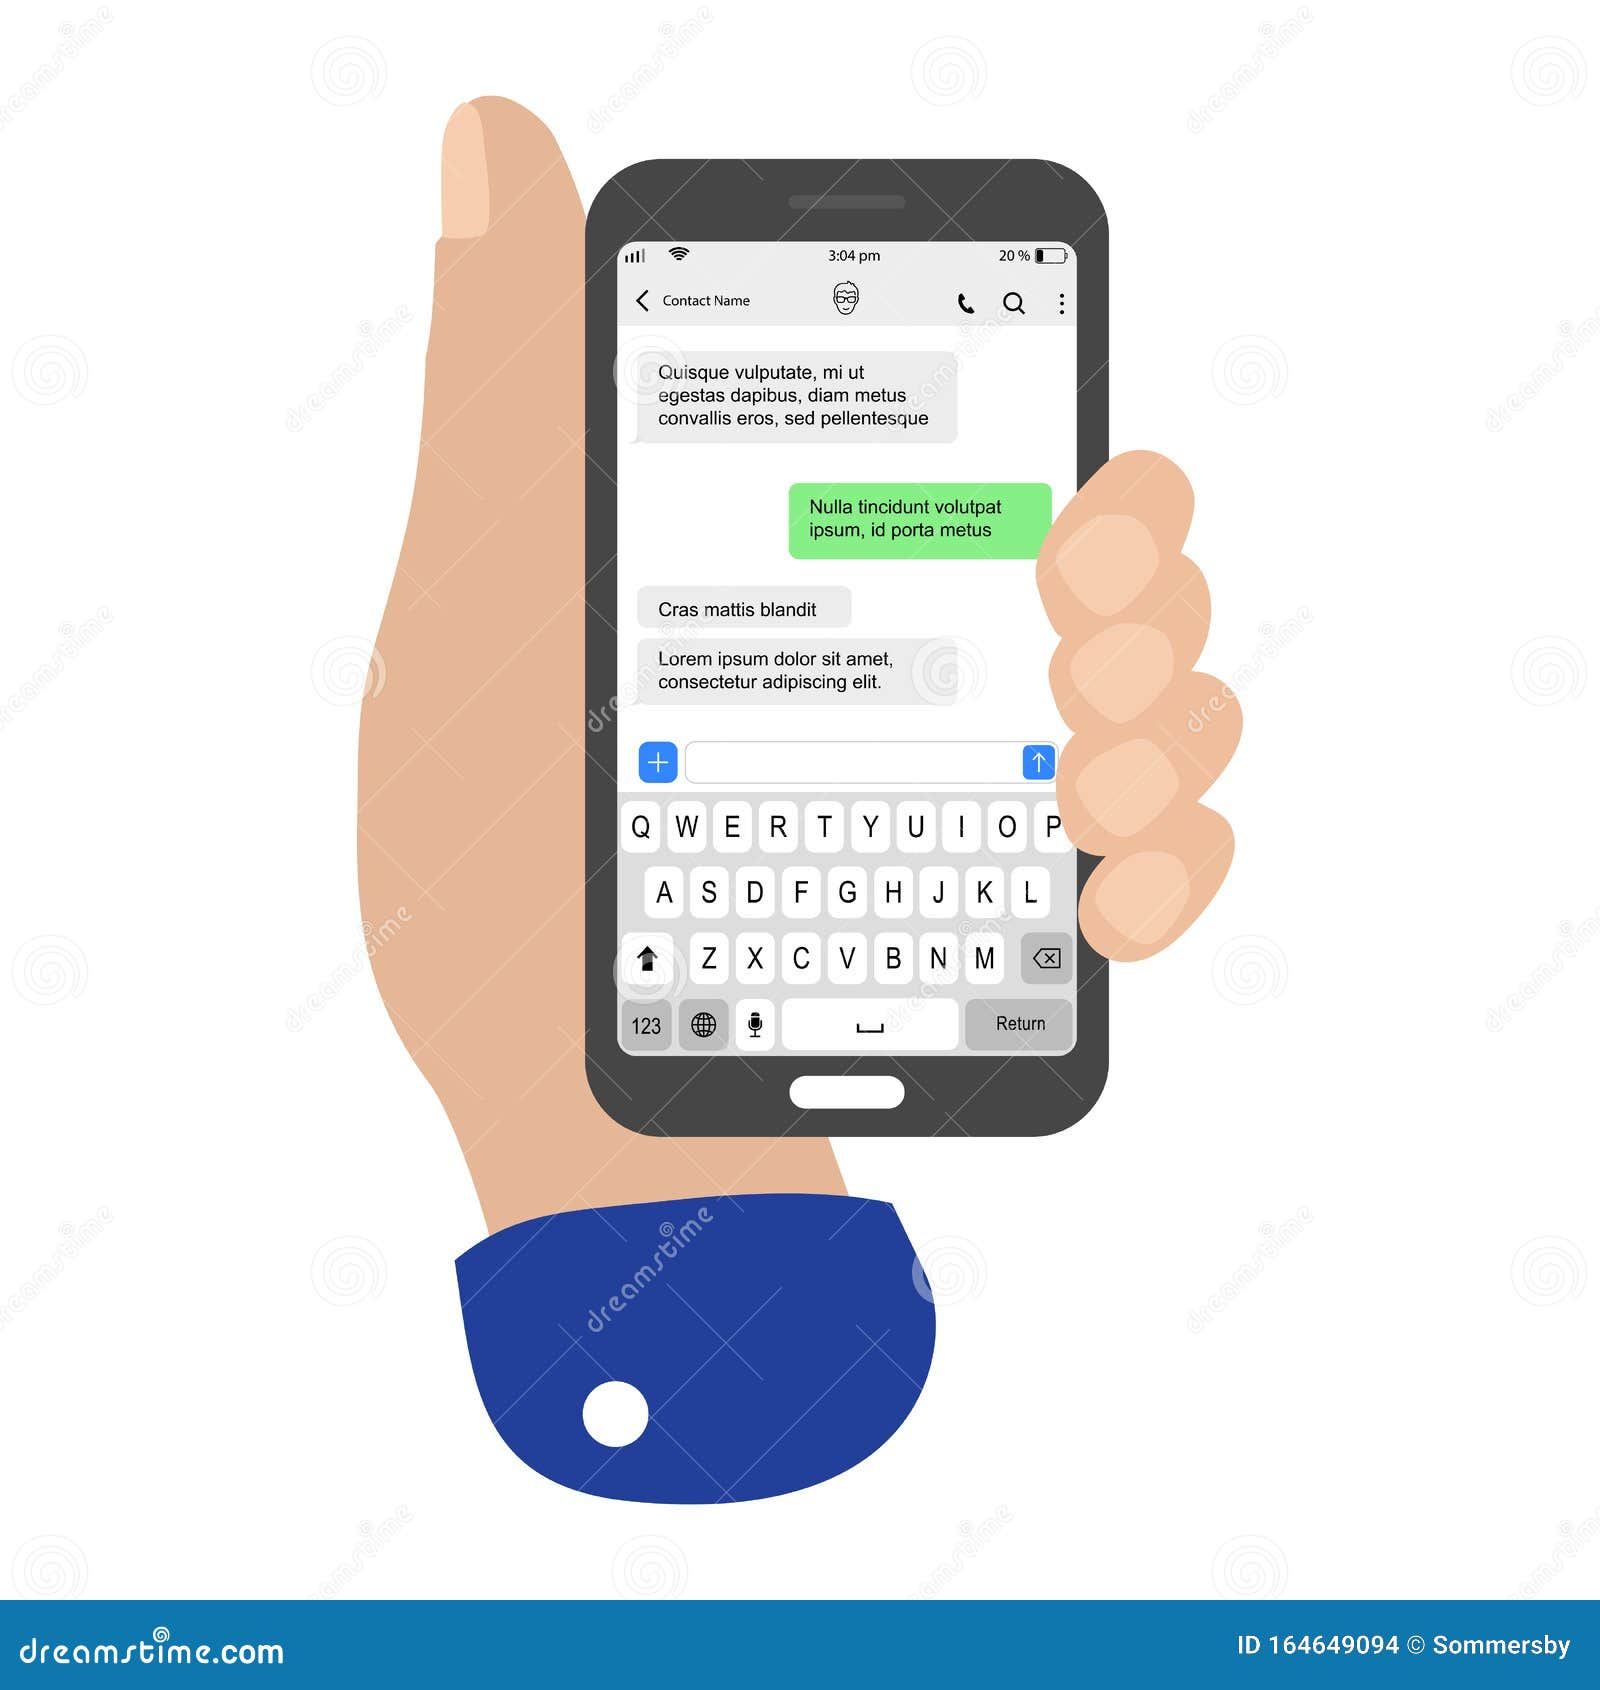 App sms chat Messenger: Text